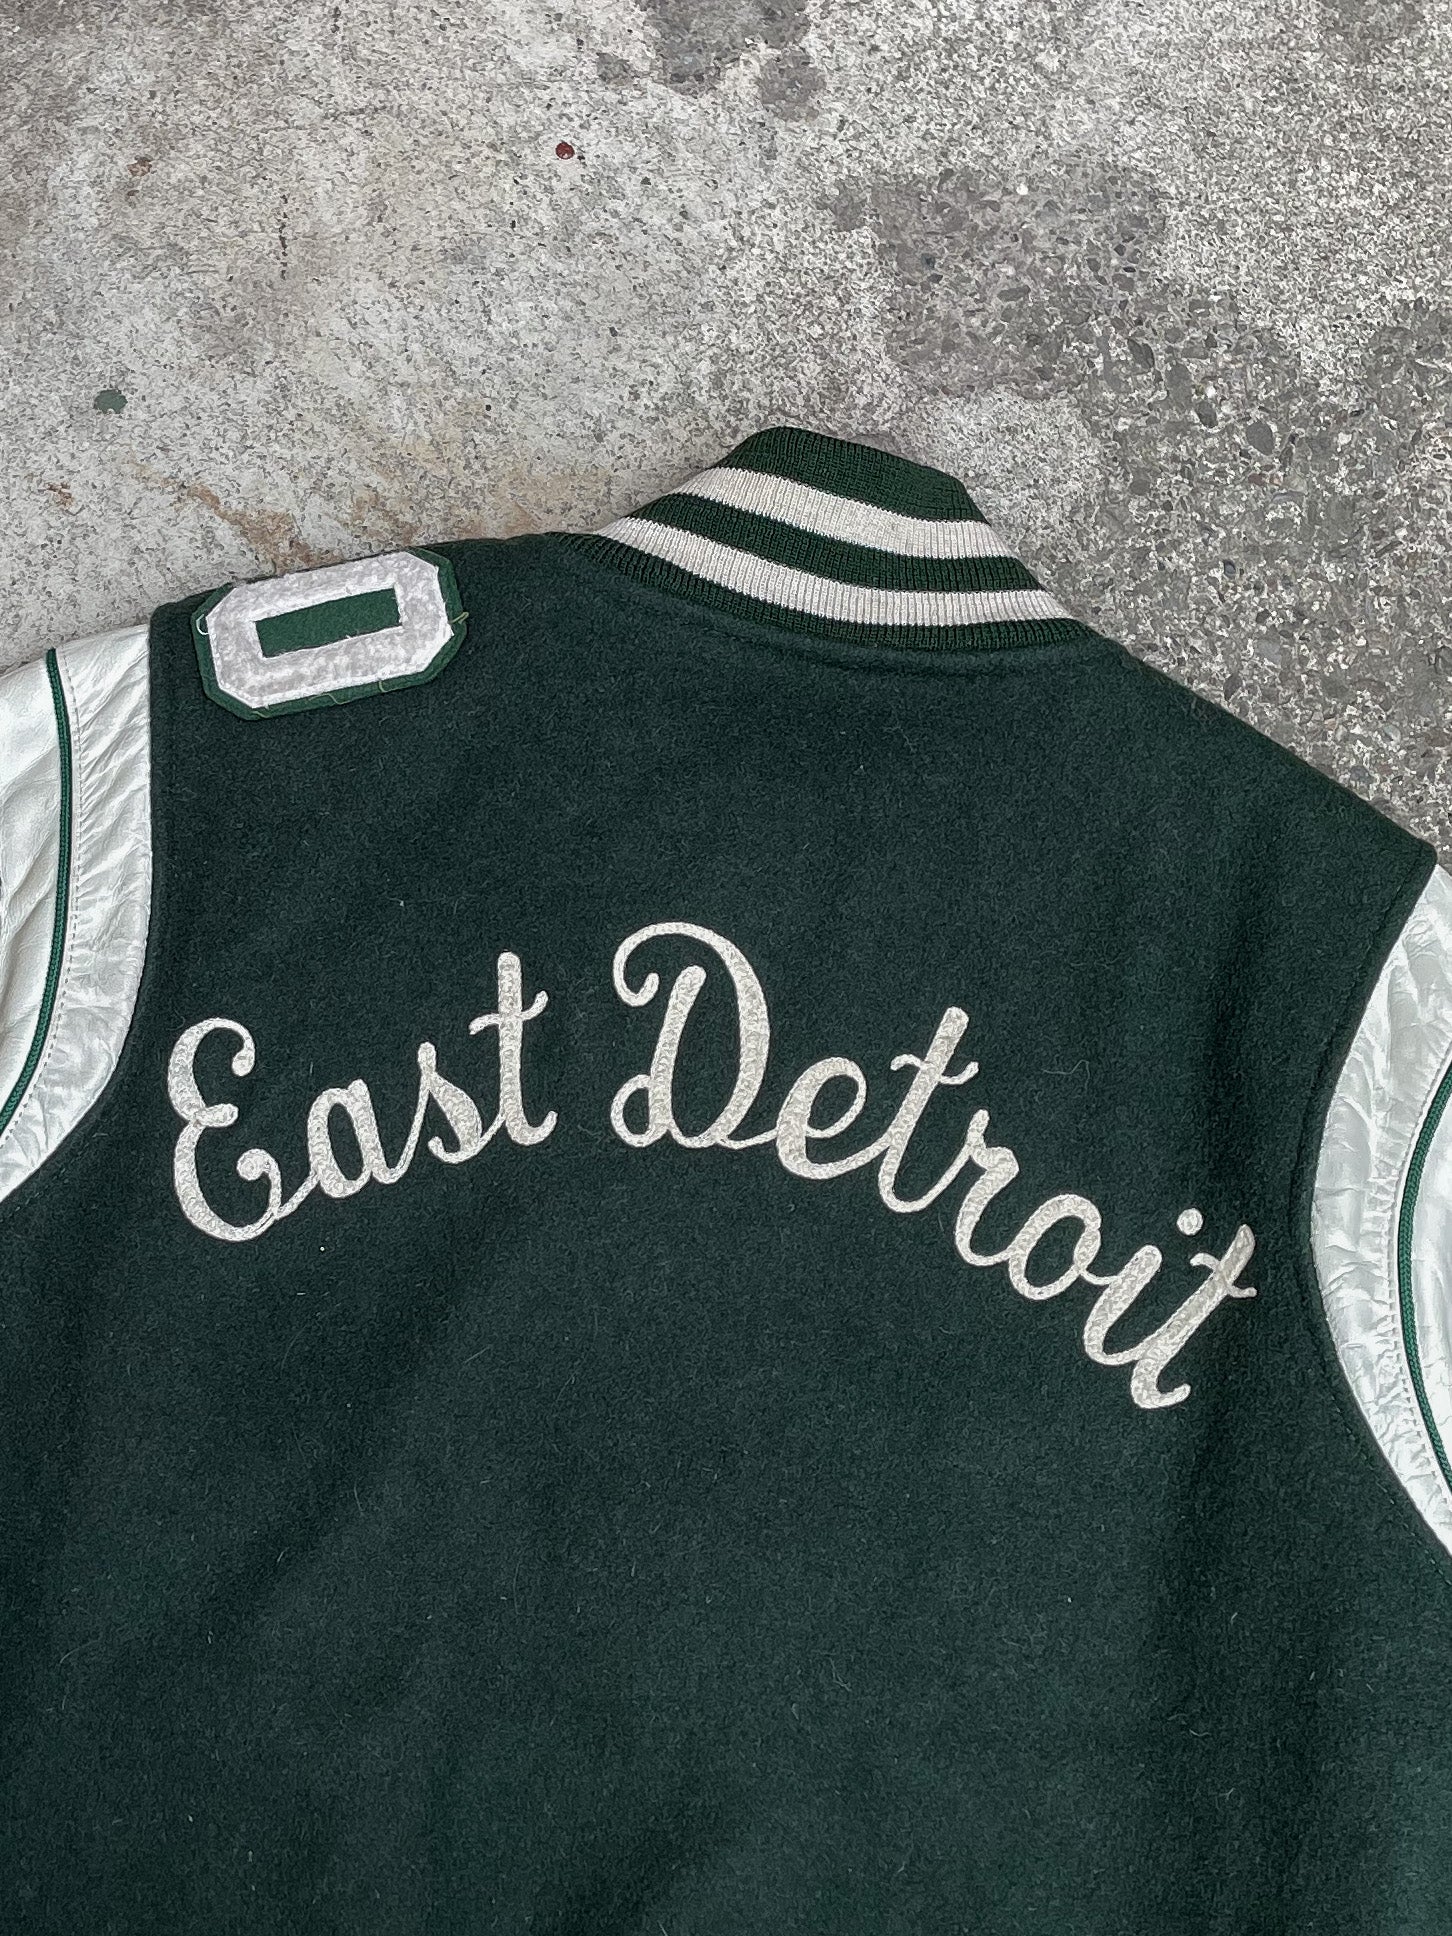 1990s “East Detroit” Forest Green Chain Stitched Leather Varsity Jacket (S/M)